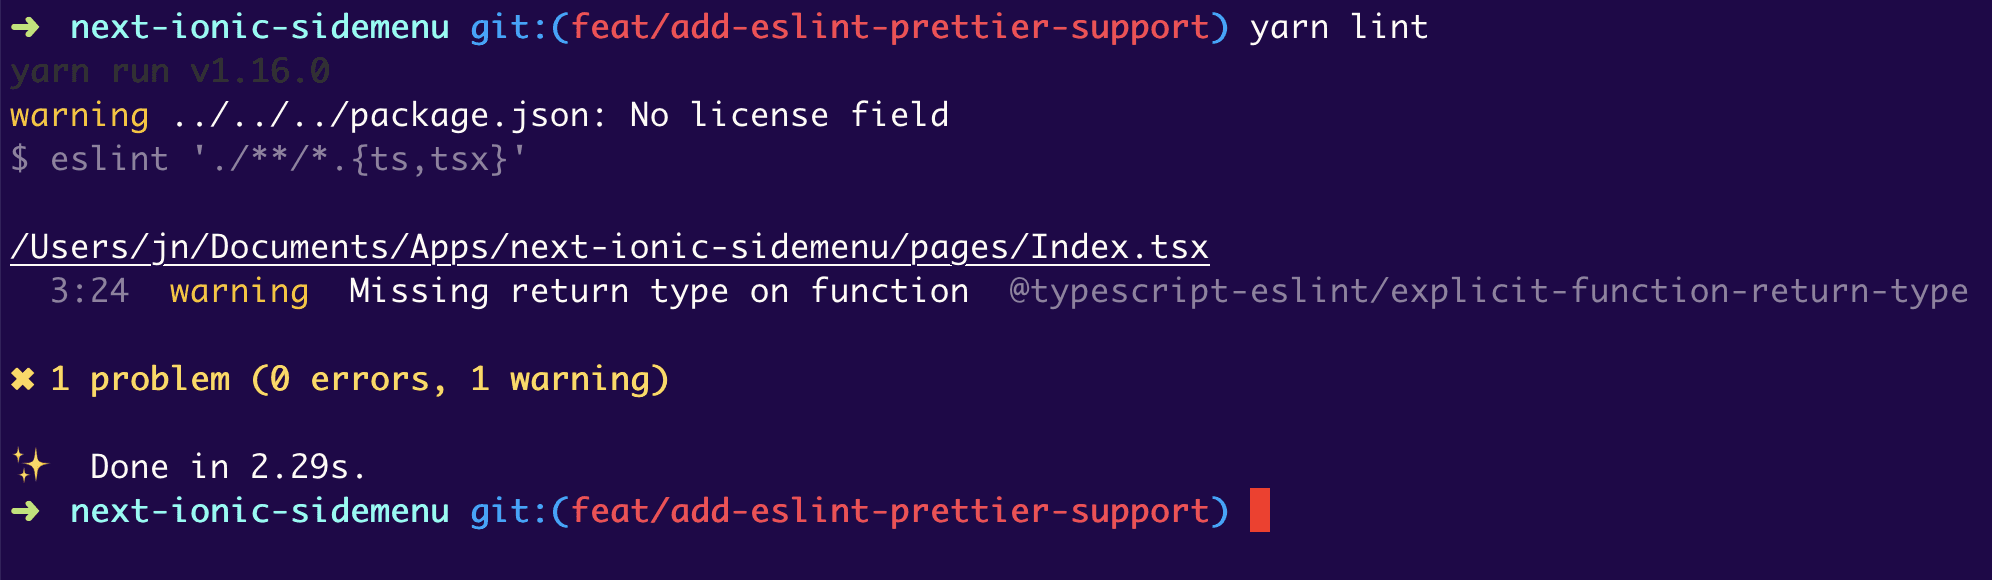 Configuring Pre-commit Hooks for Prettier and Linting on a TypeScript Project